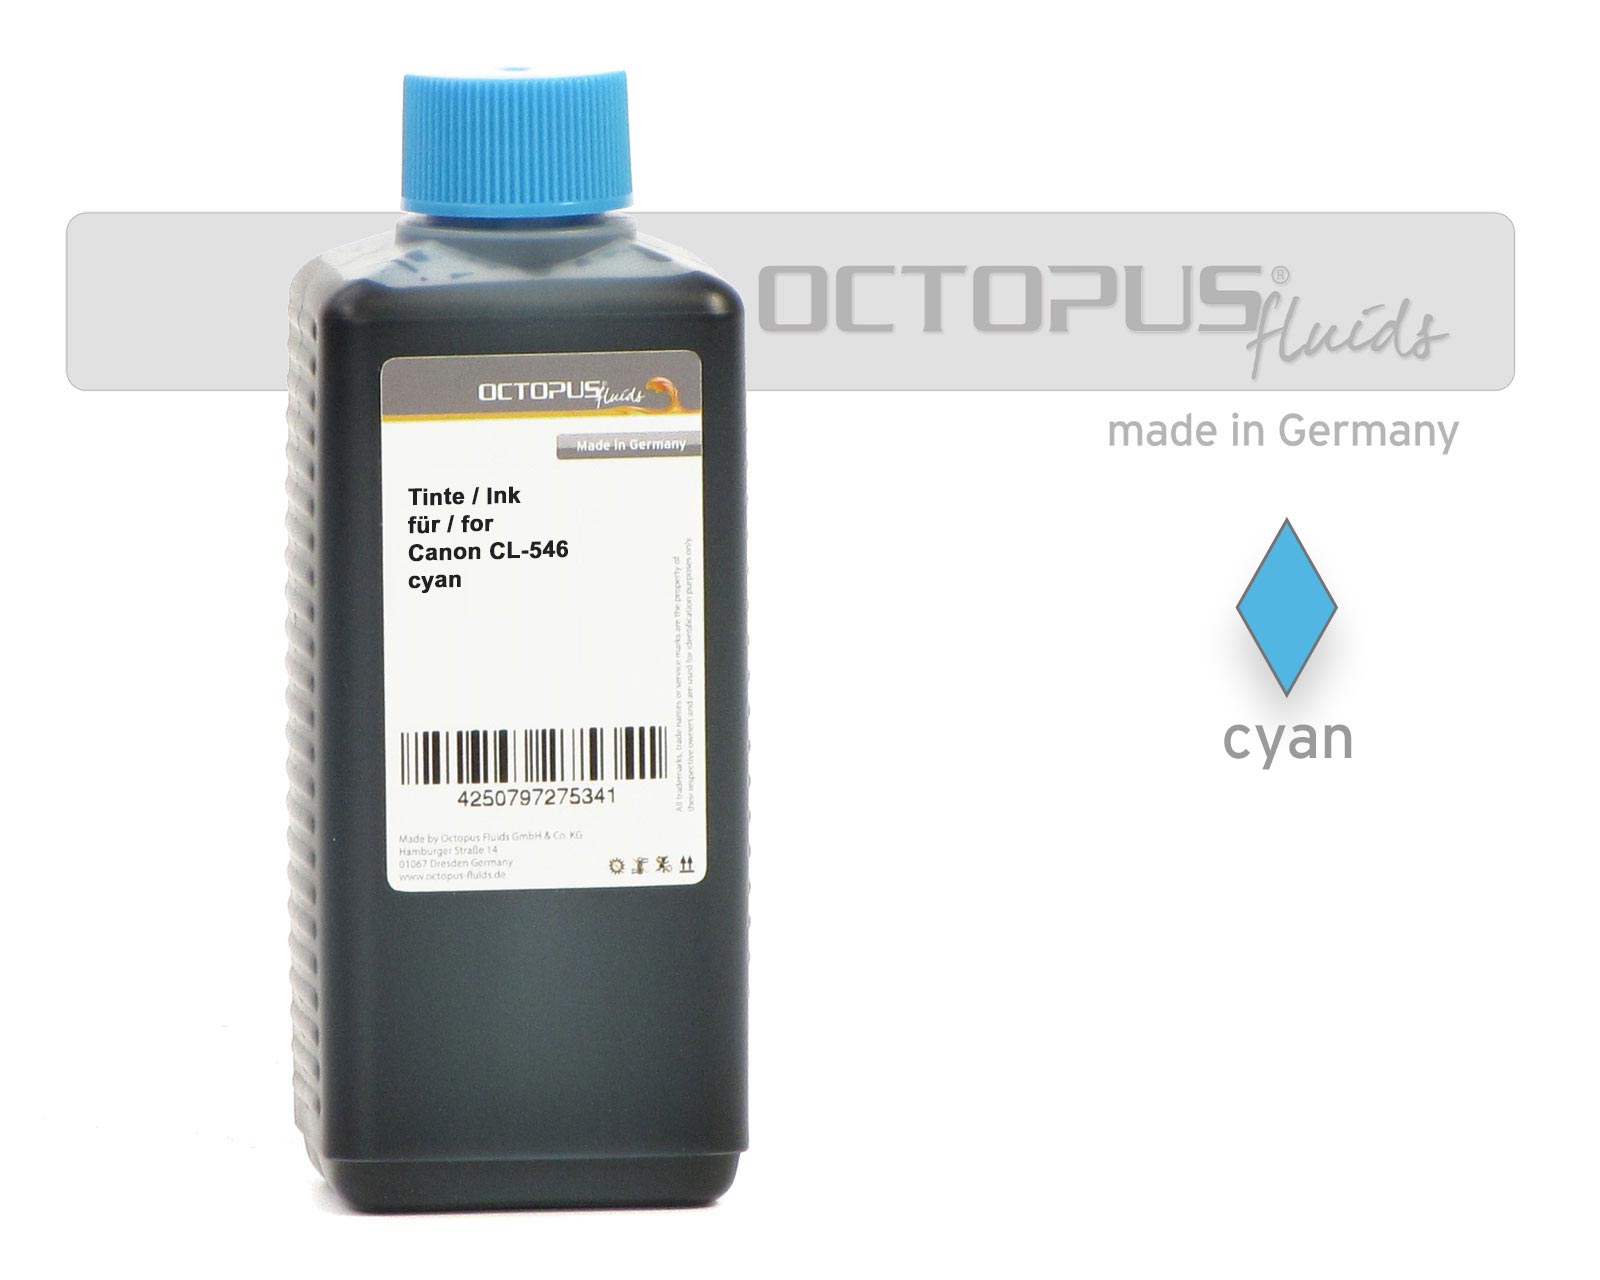 Octopus ink for Canon CL-546 color cartridges cyan